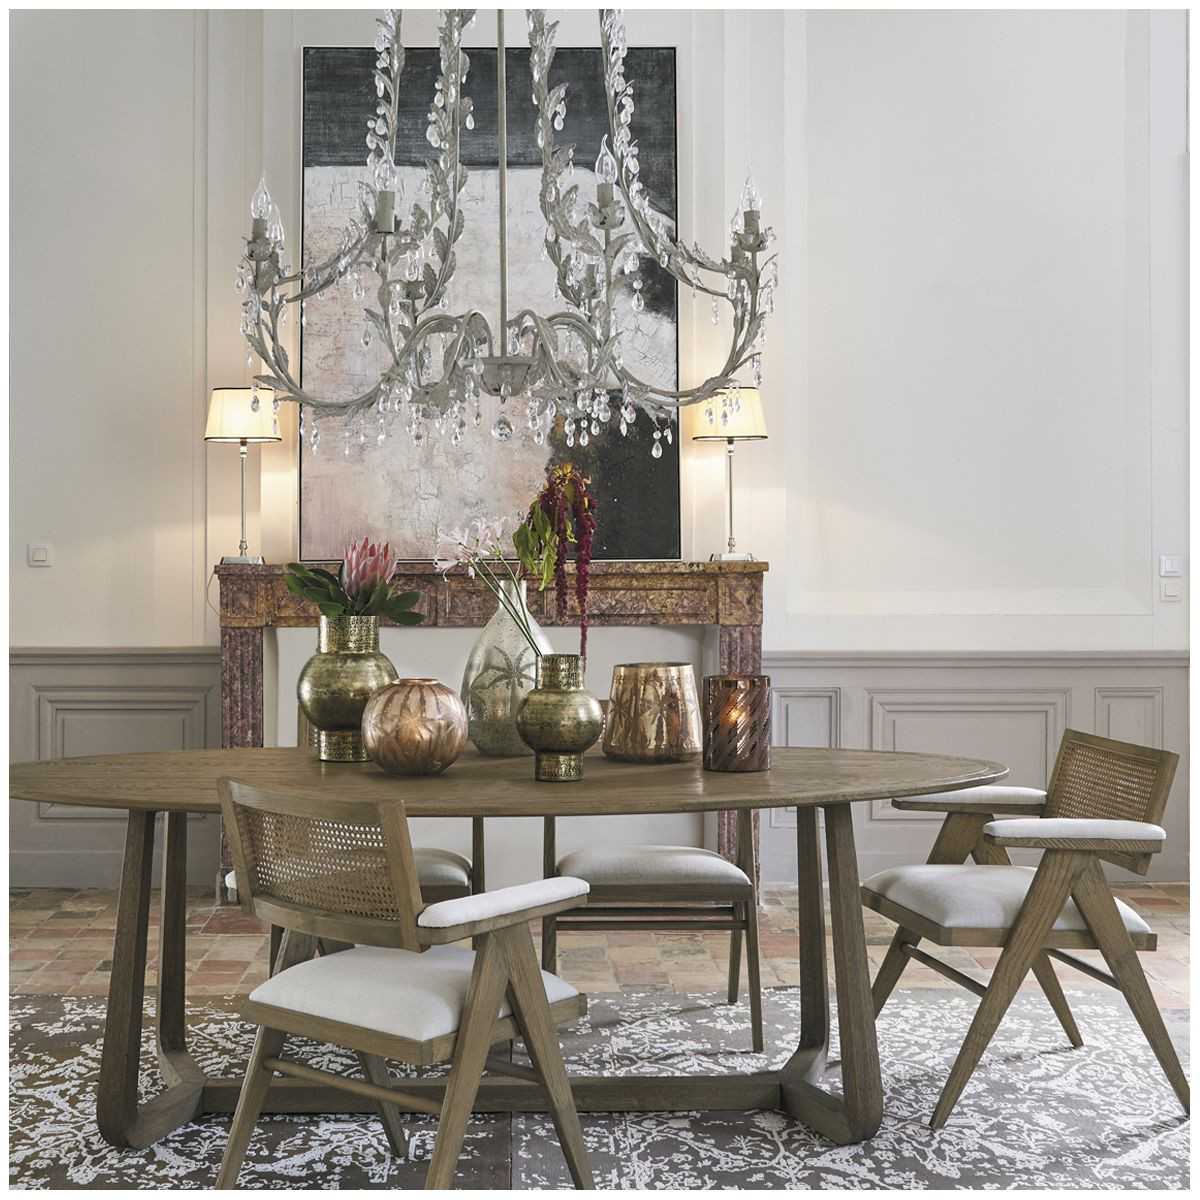 Category Chairs - Bougie personnalisée : Natural CLARA chair , CLARA Chair , COLBY armchair beige top , COLBY armchair top ec...